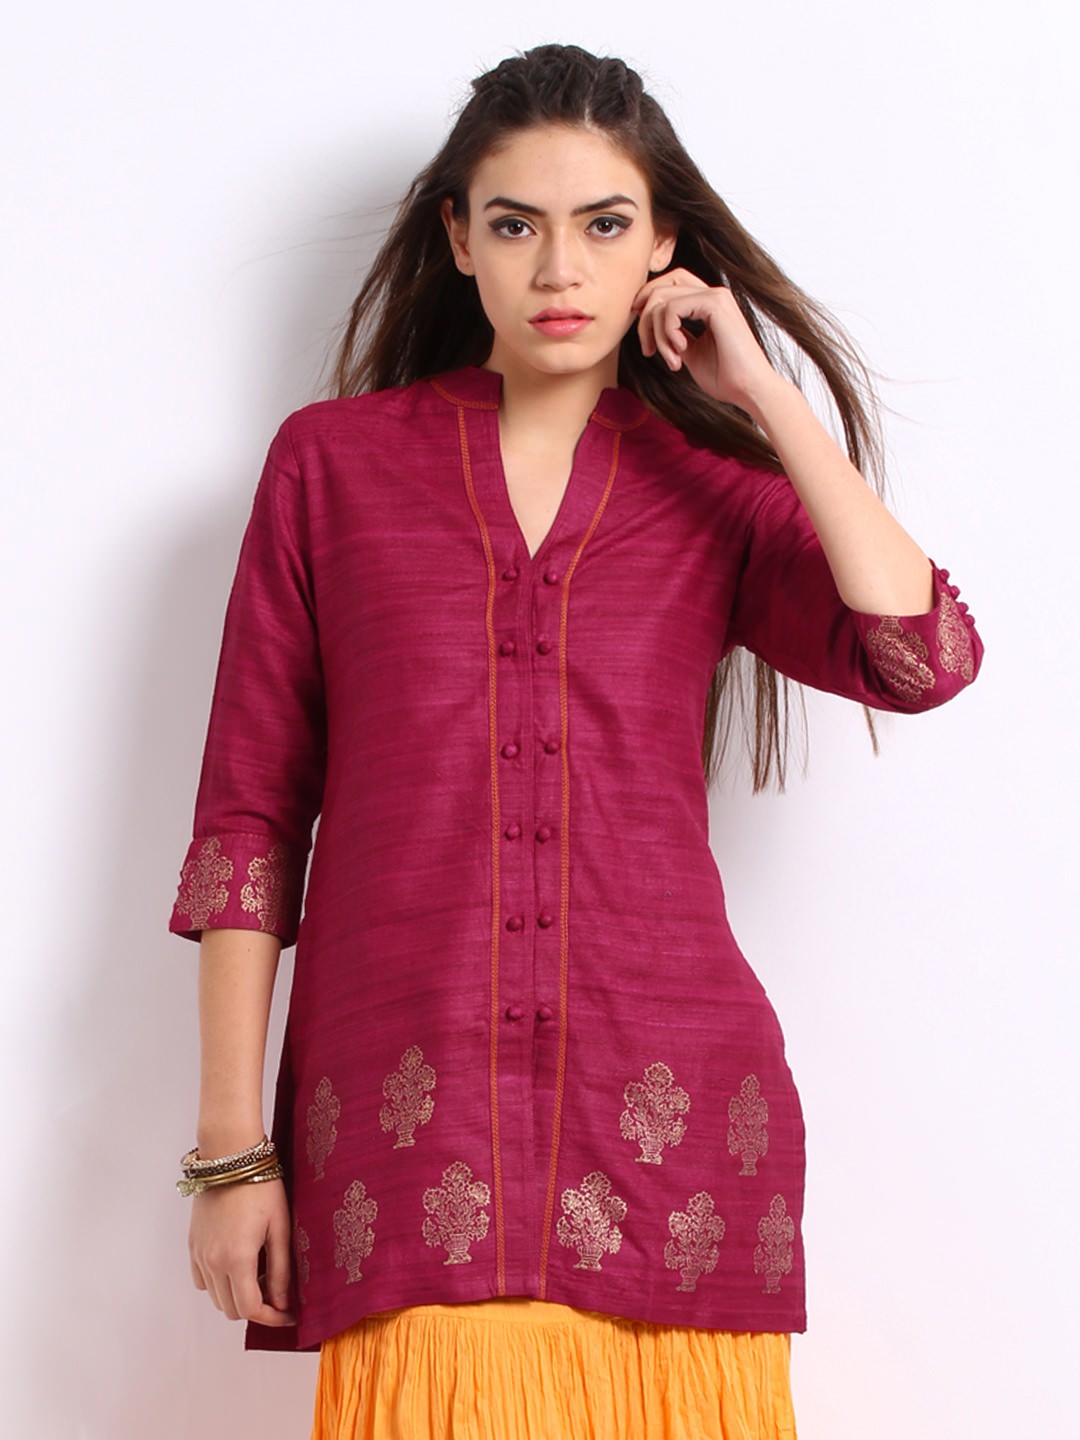 Anouk-Rustic-Women-Tunics_ Ladies Tops and Shirts By Best Brands